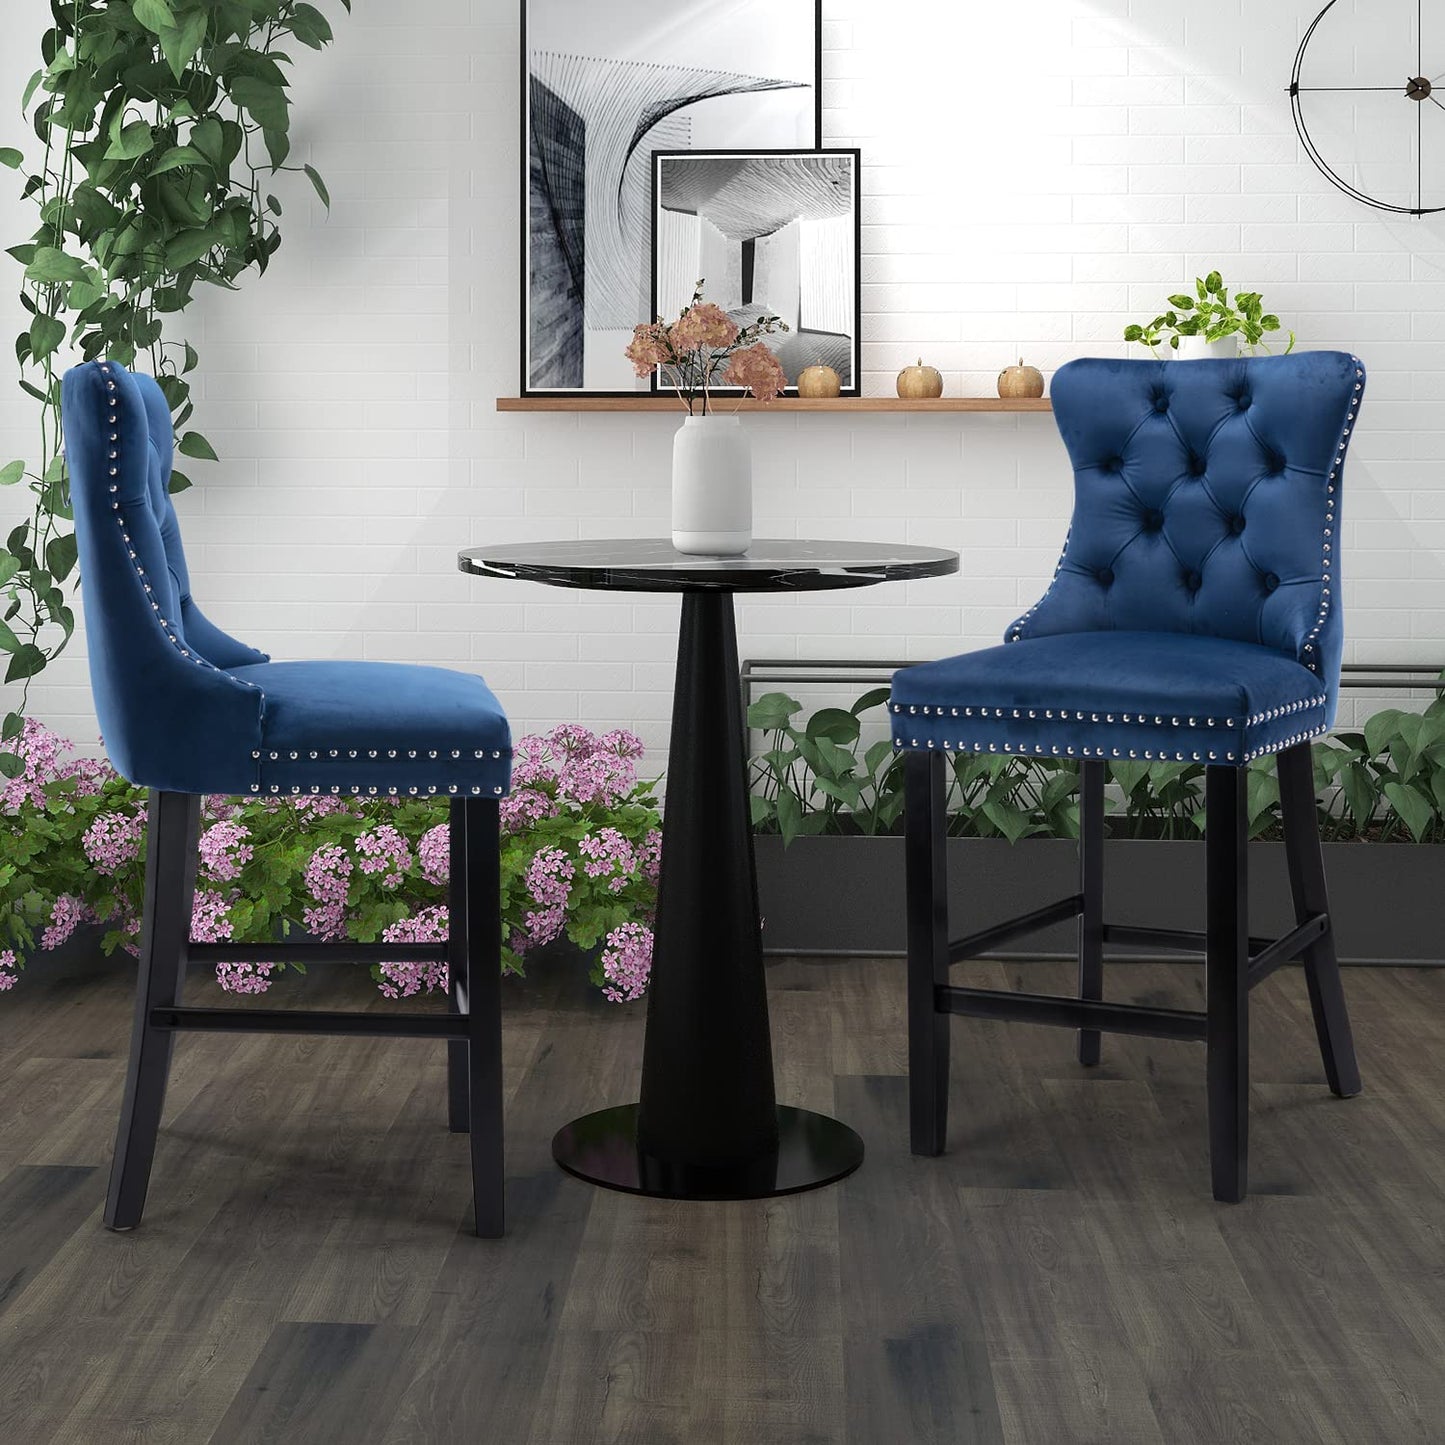 Flint Velvet Kitchen Bar Stools and chair with Studs set of 4